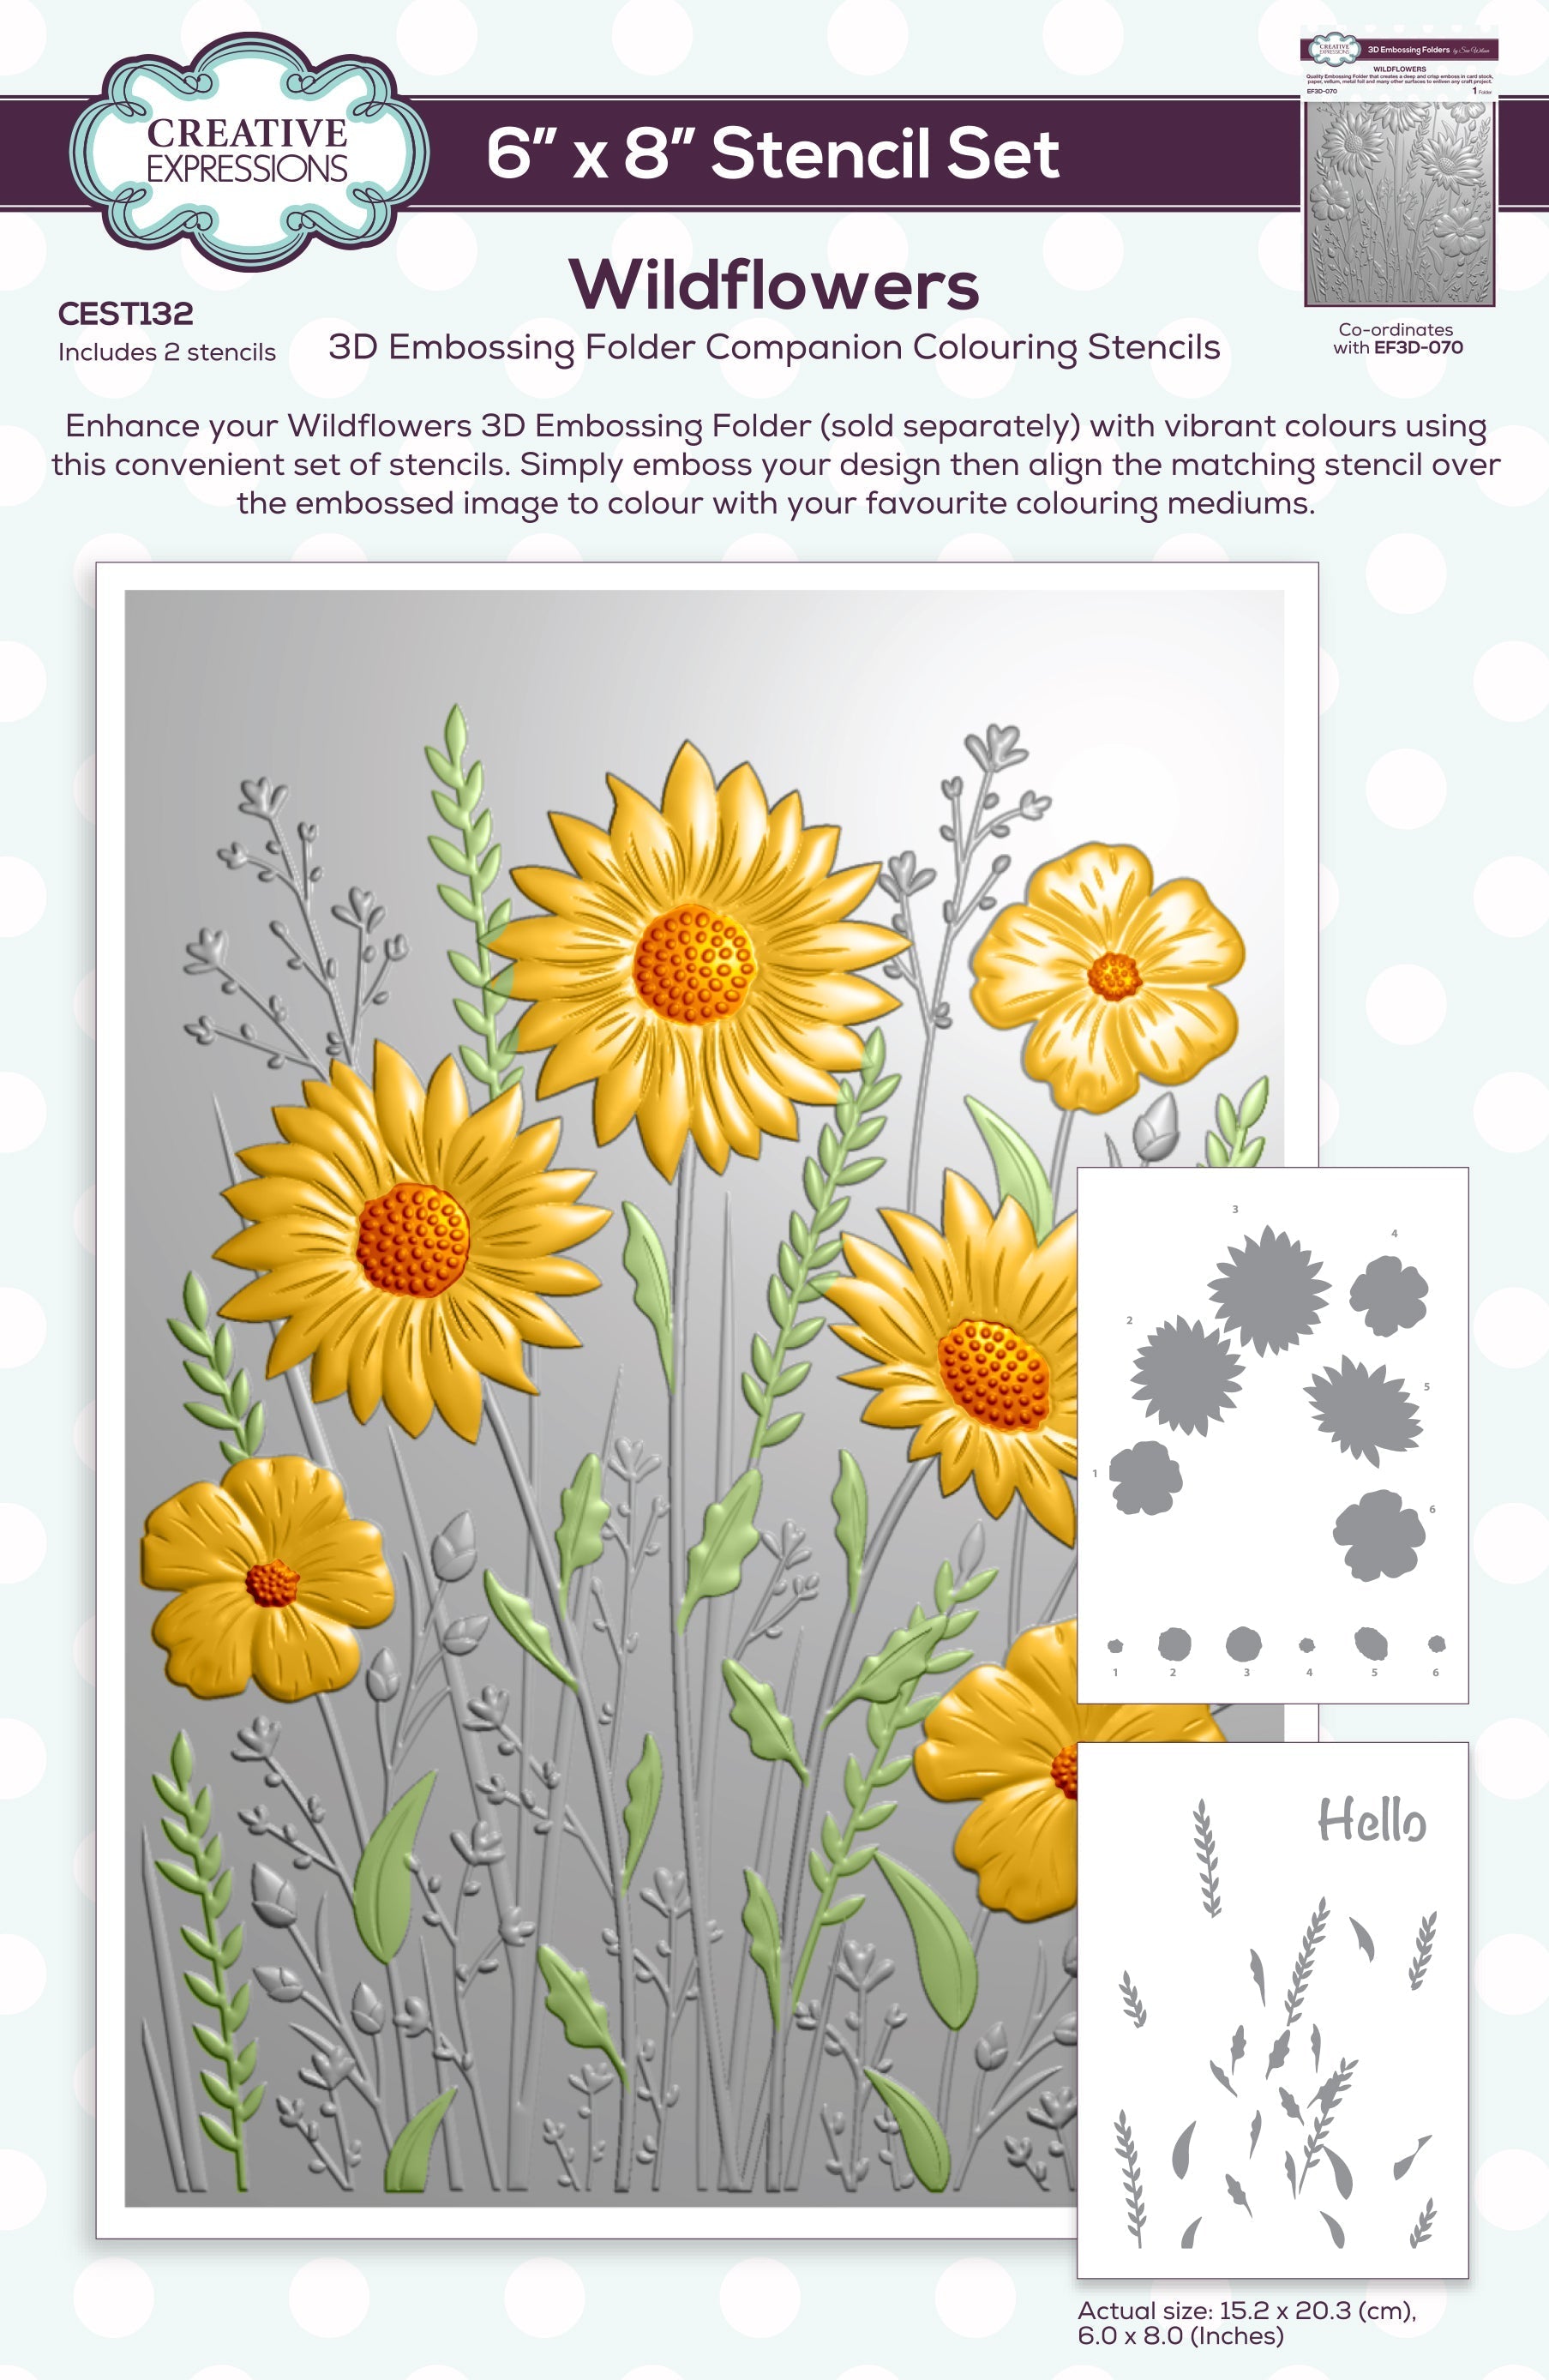 Creative Expressions Wildflowers Companion Colouring Stencil Set 6 in x 8 in 2pk